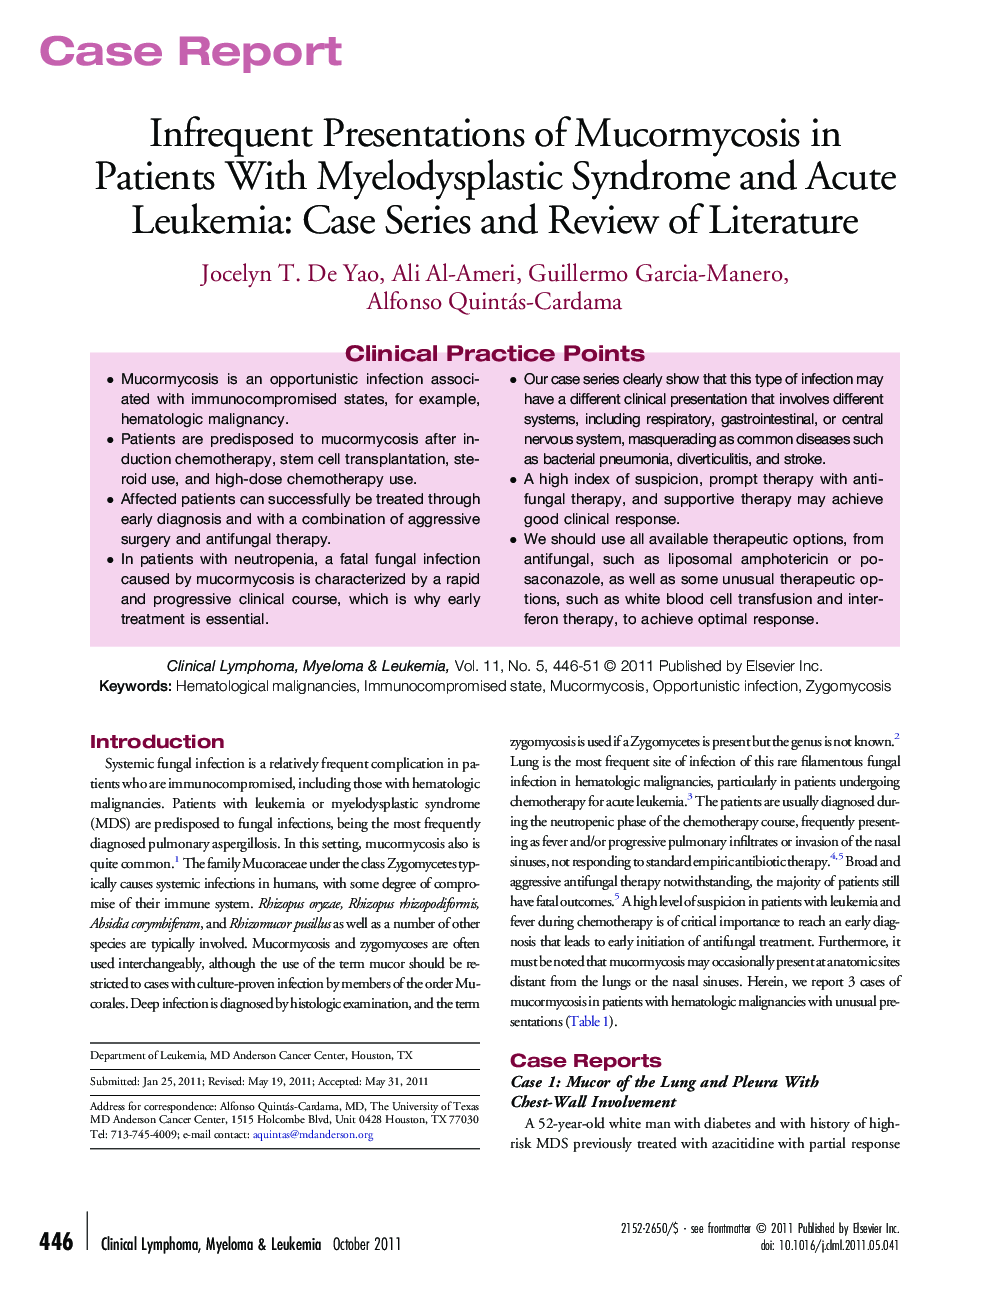 Infrequent Presentations of Mucormycosis in Patients With Myelodysplastic Syndrome and Acute Leukemia: Case Series and Review of Literature